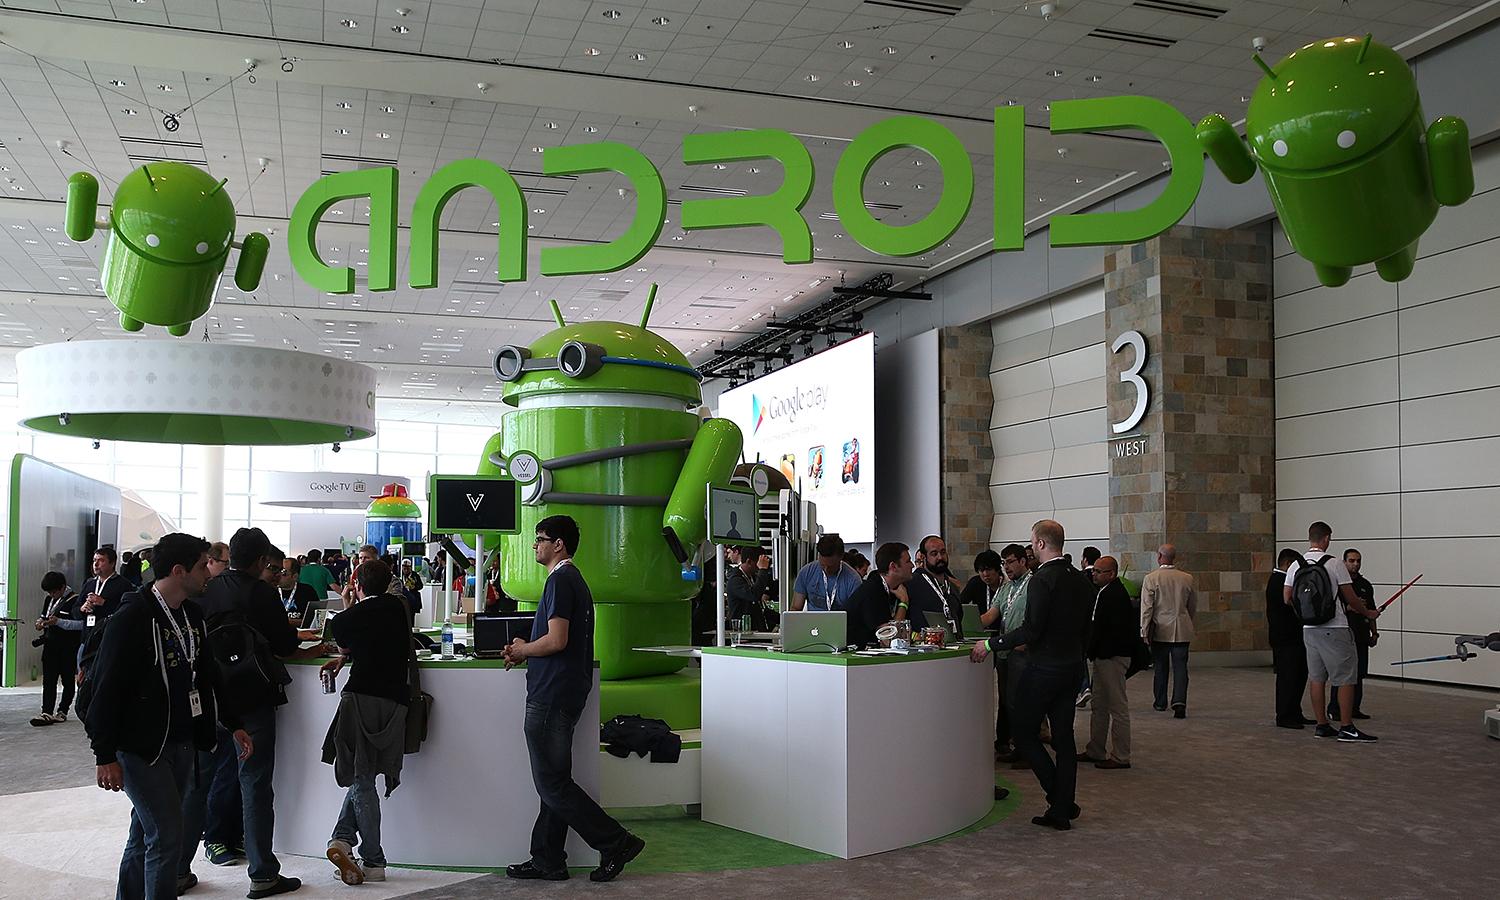 Attendees visit the Android booth during the Google I/O developers conference at the Moscone Center on May 15, 2013, in San Francisco. (Photo by Justin Sullivan/Getty Images)